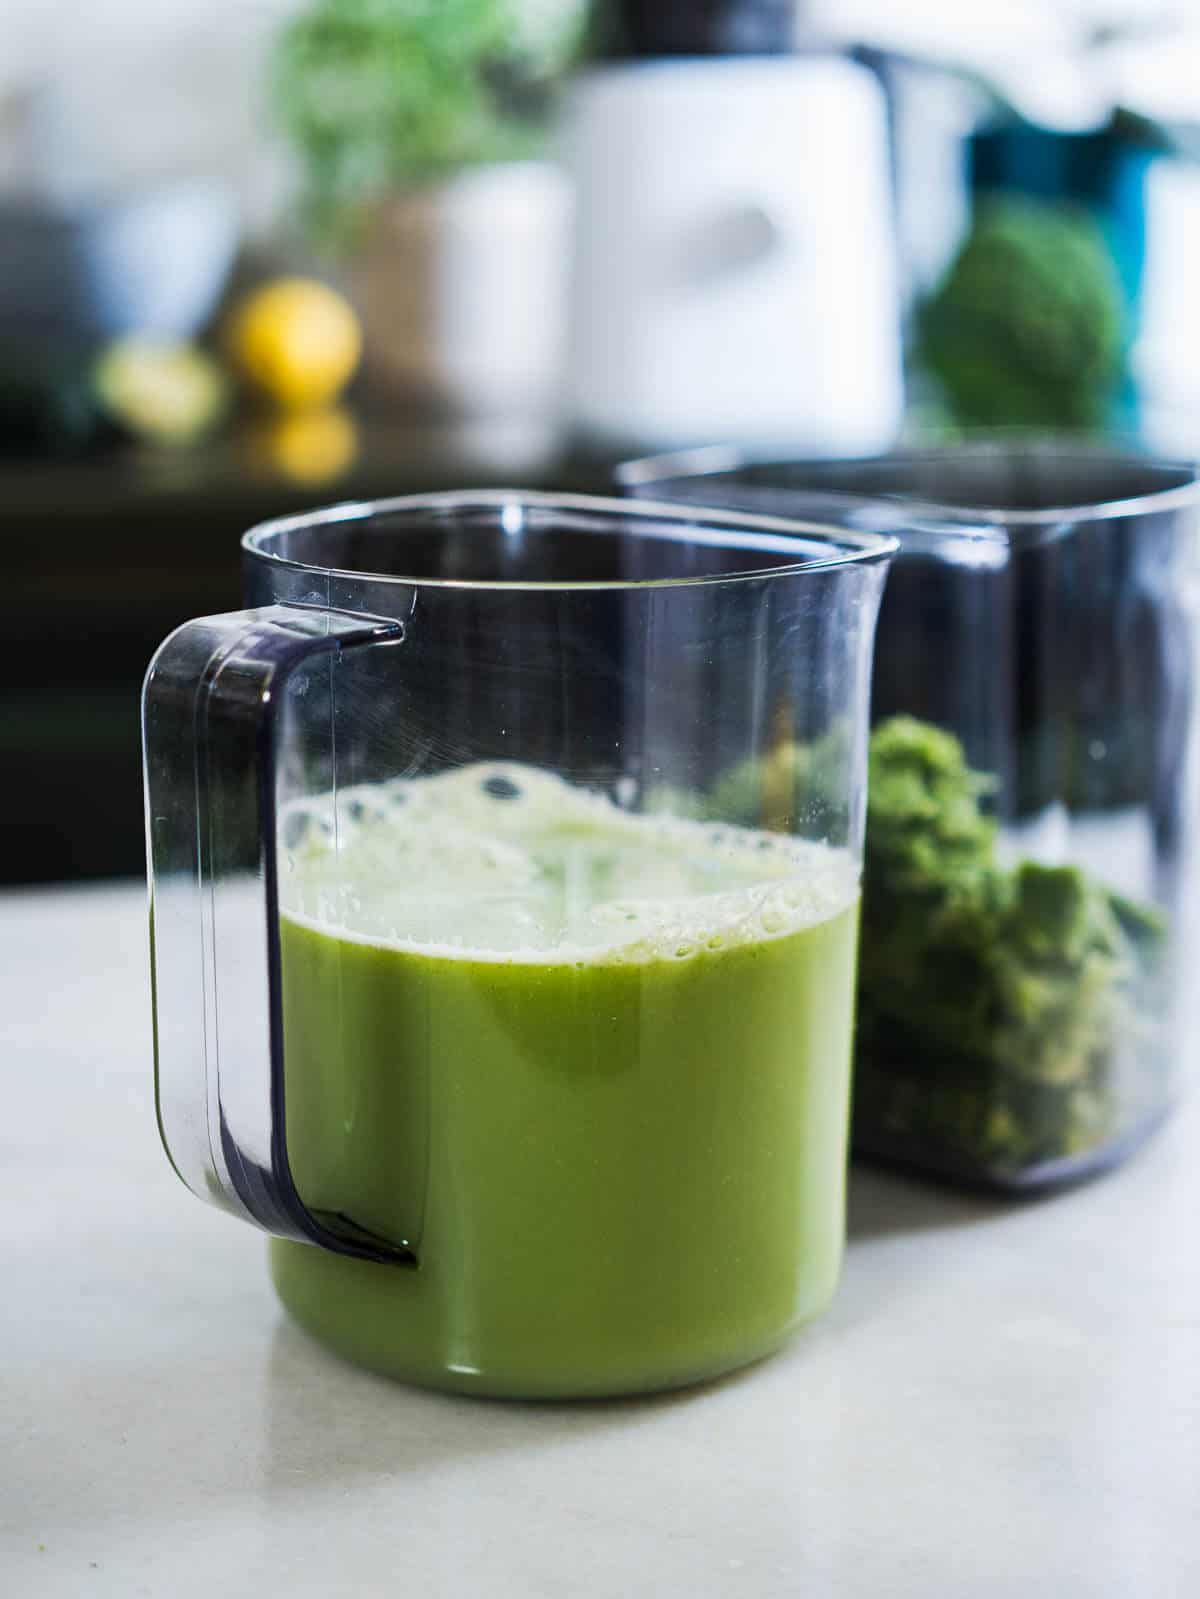 two separate jars, one with broccoli juice and the other with green reusable pulp.